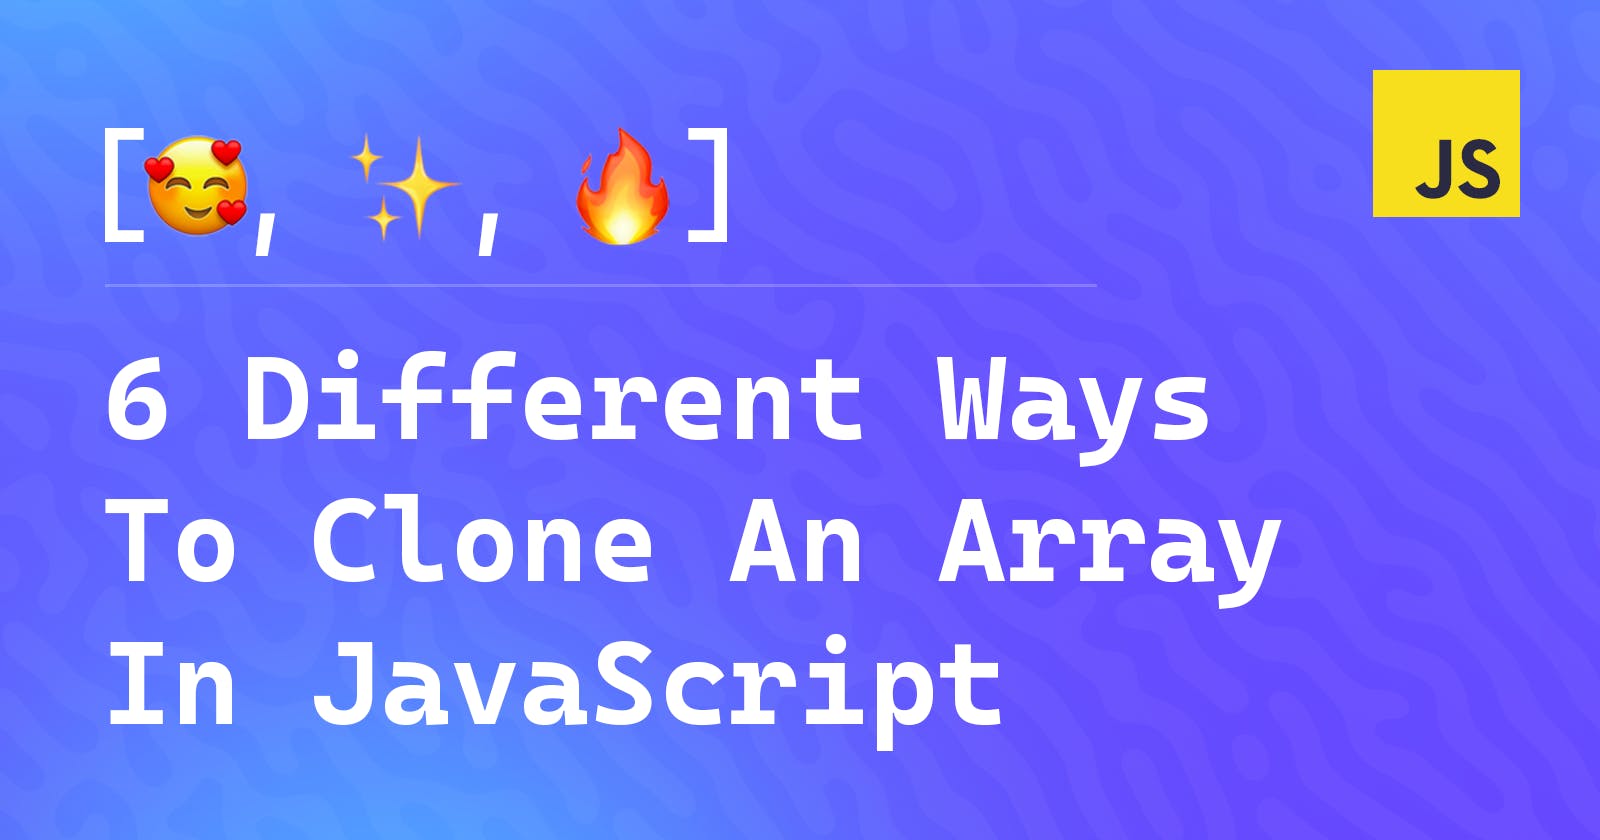 6 Different Ways To Clone An Array In JavaScript 📑